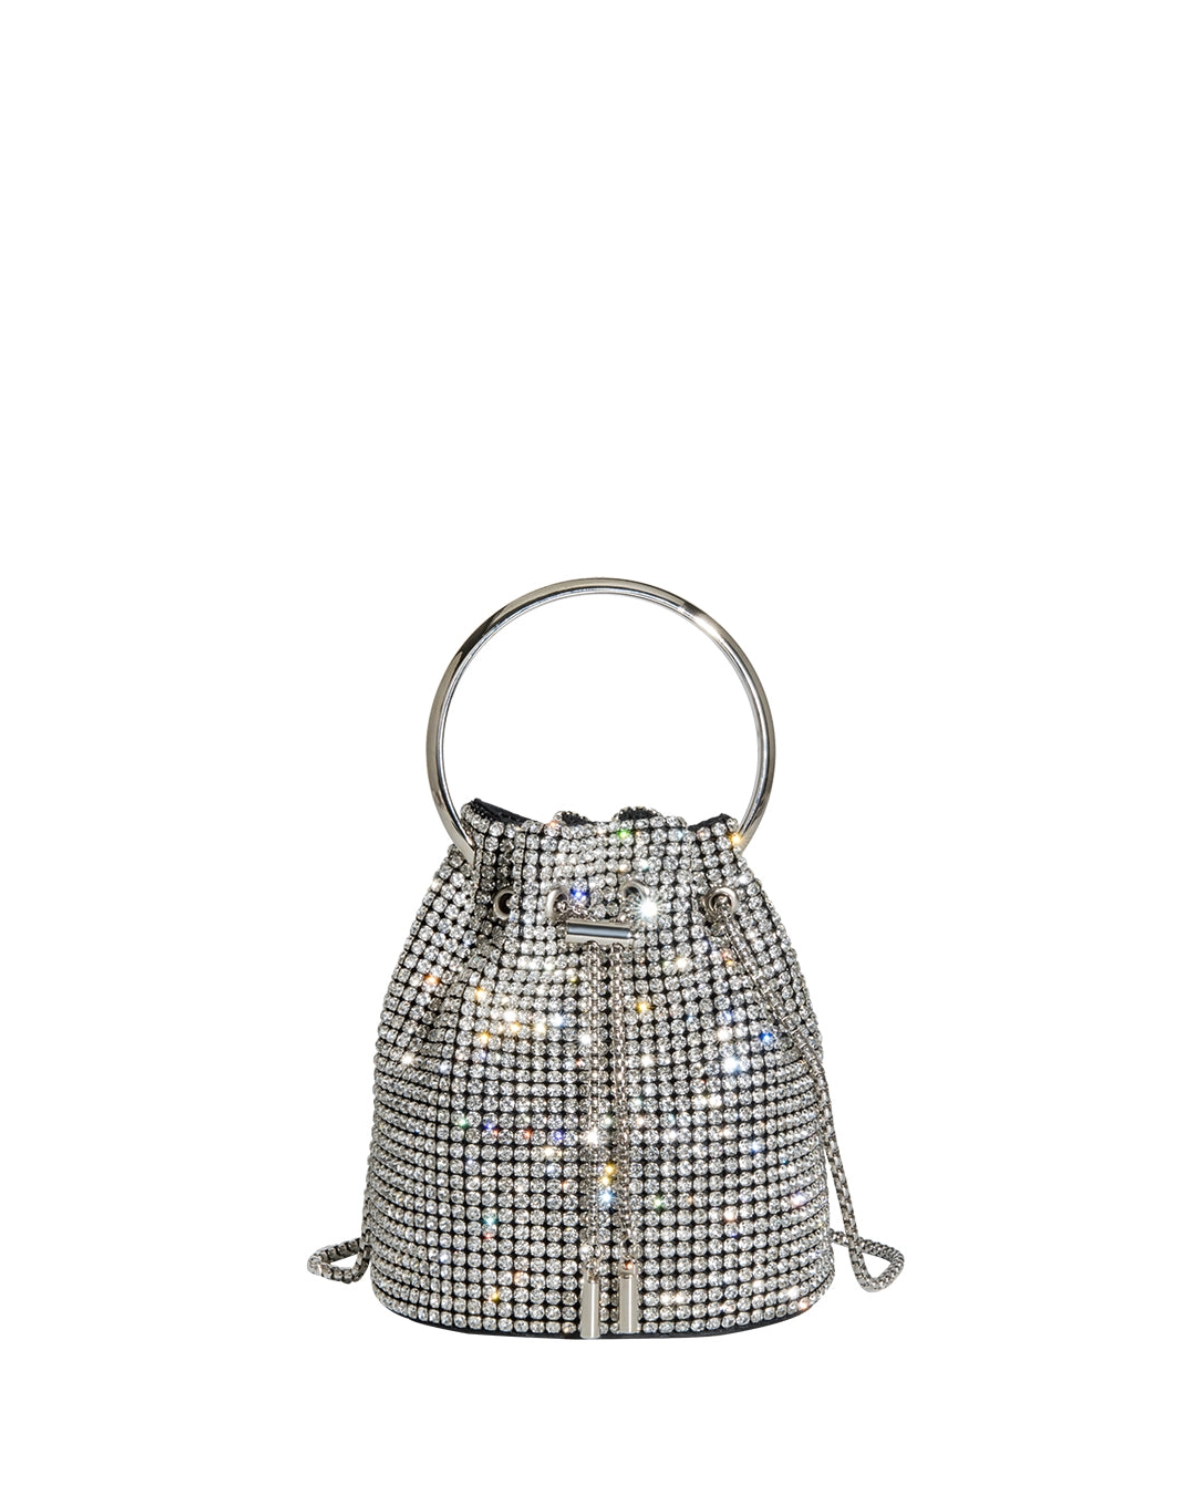 Image of Melie Bianco Kasee Crystal Top Handle bag on a white background